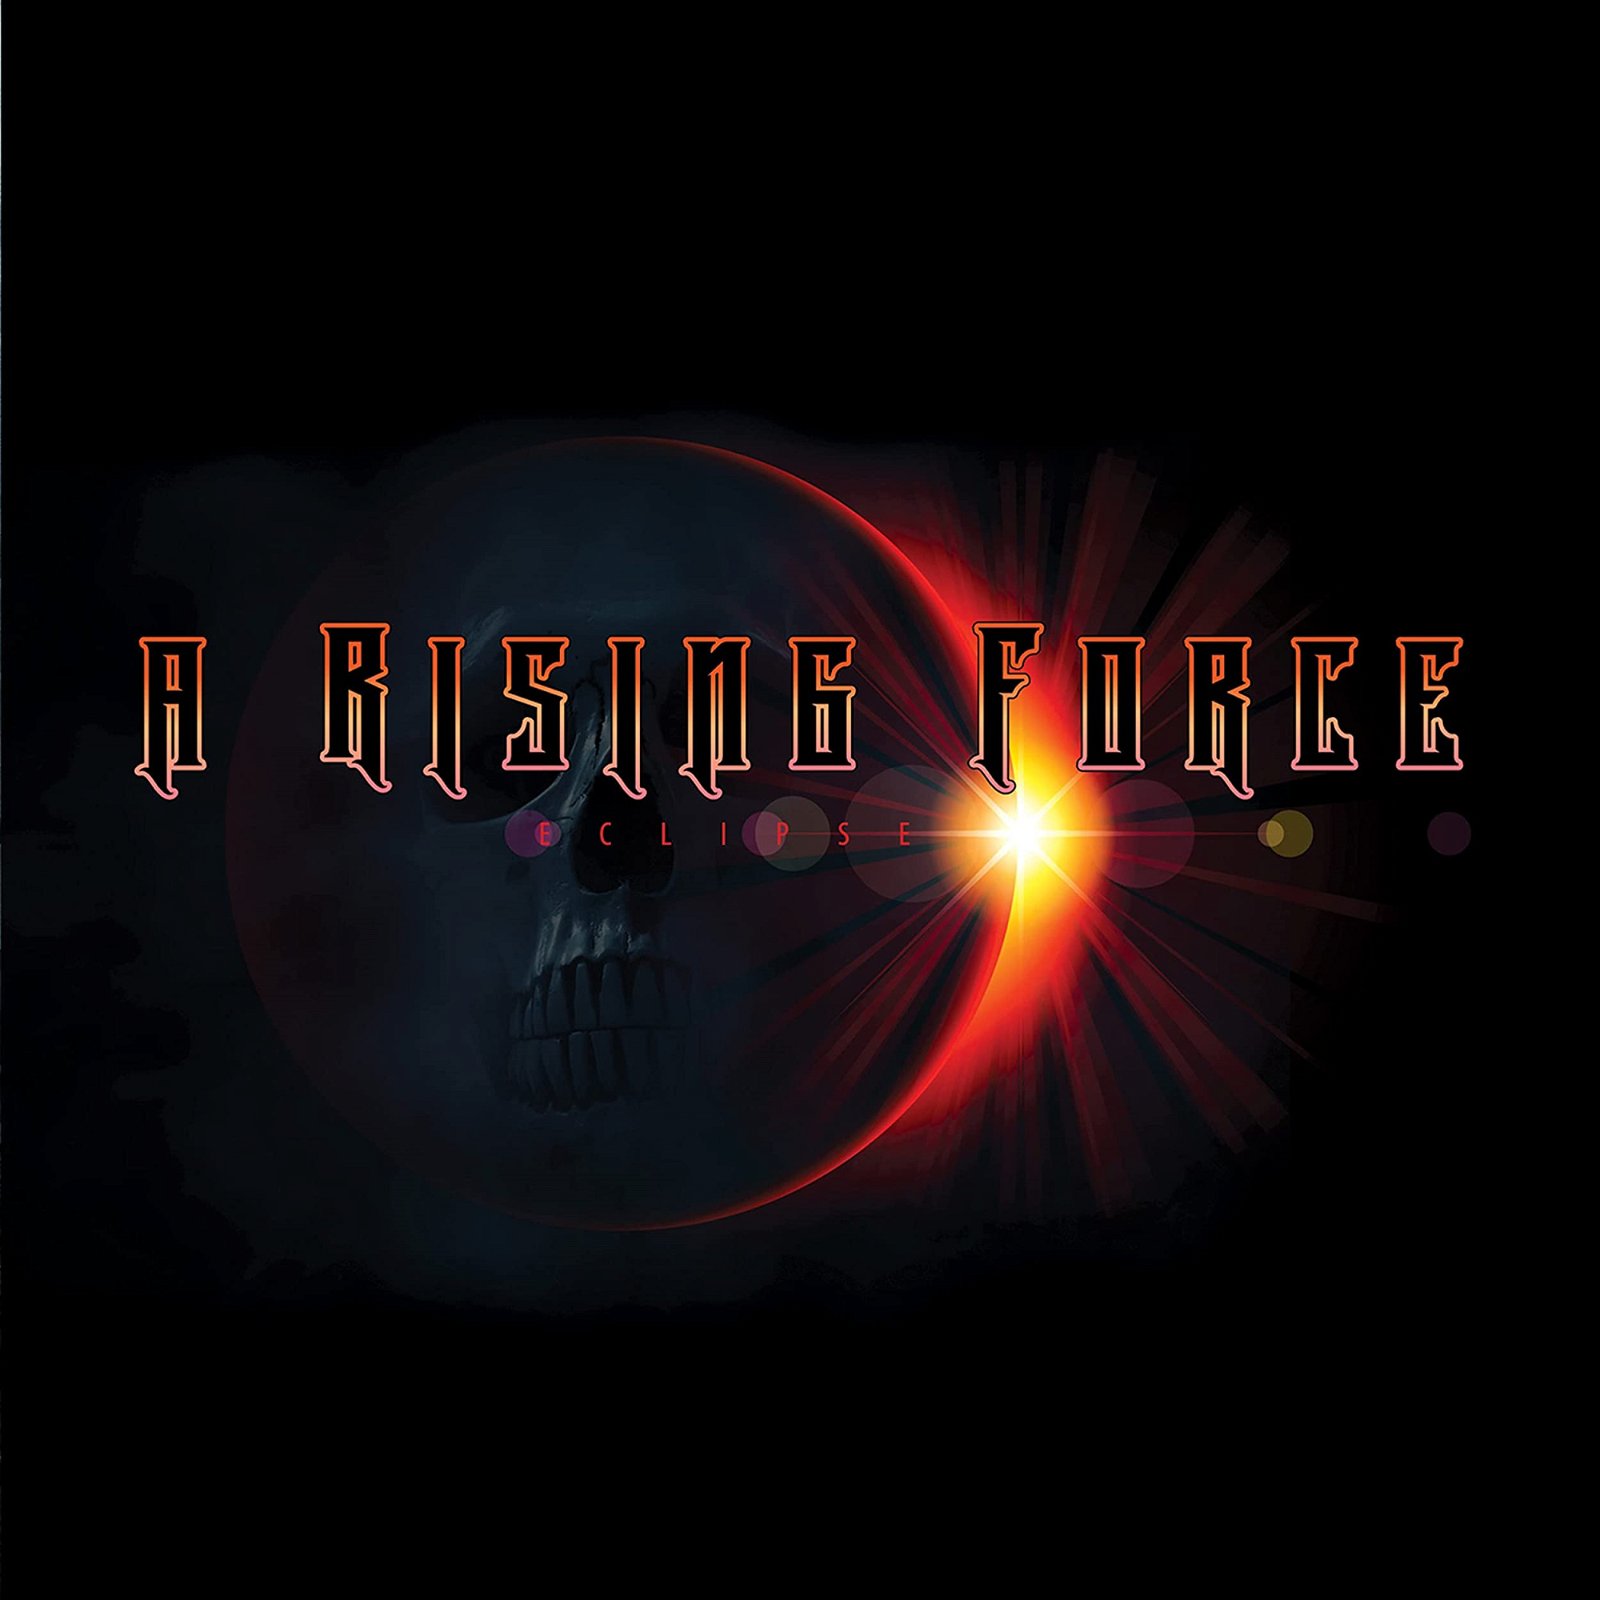 CD Shop - A RISING FORCE ECLIPSE